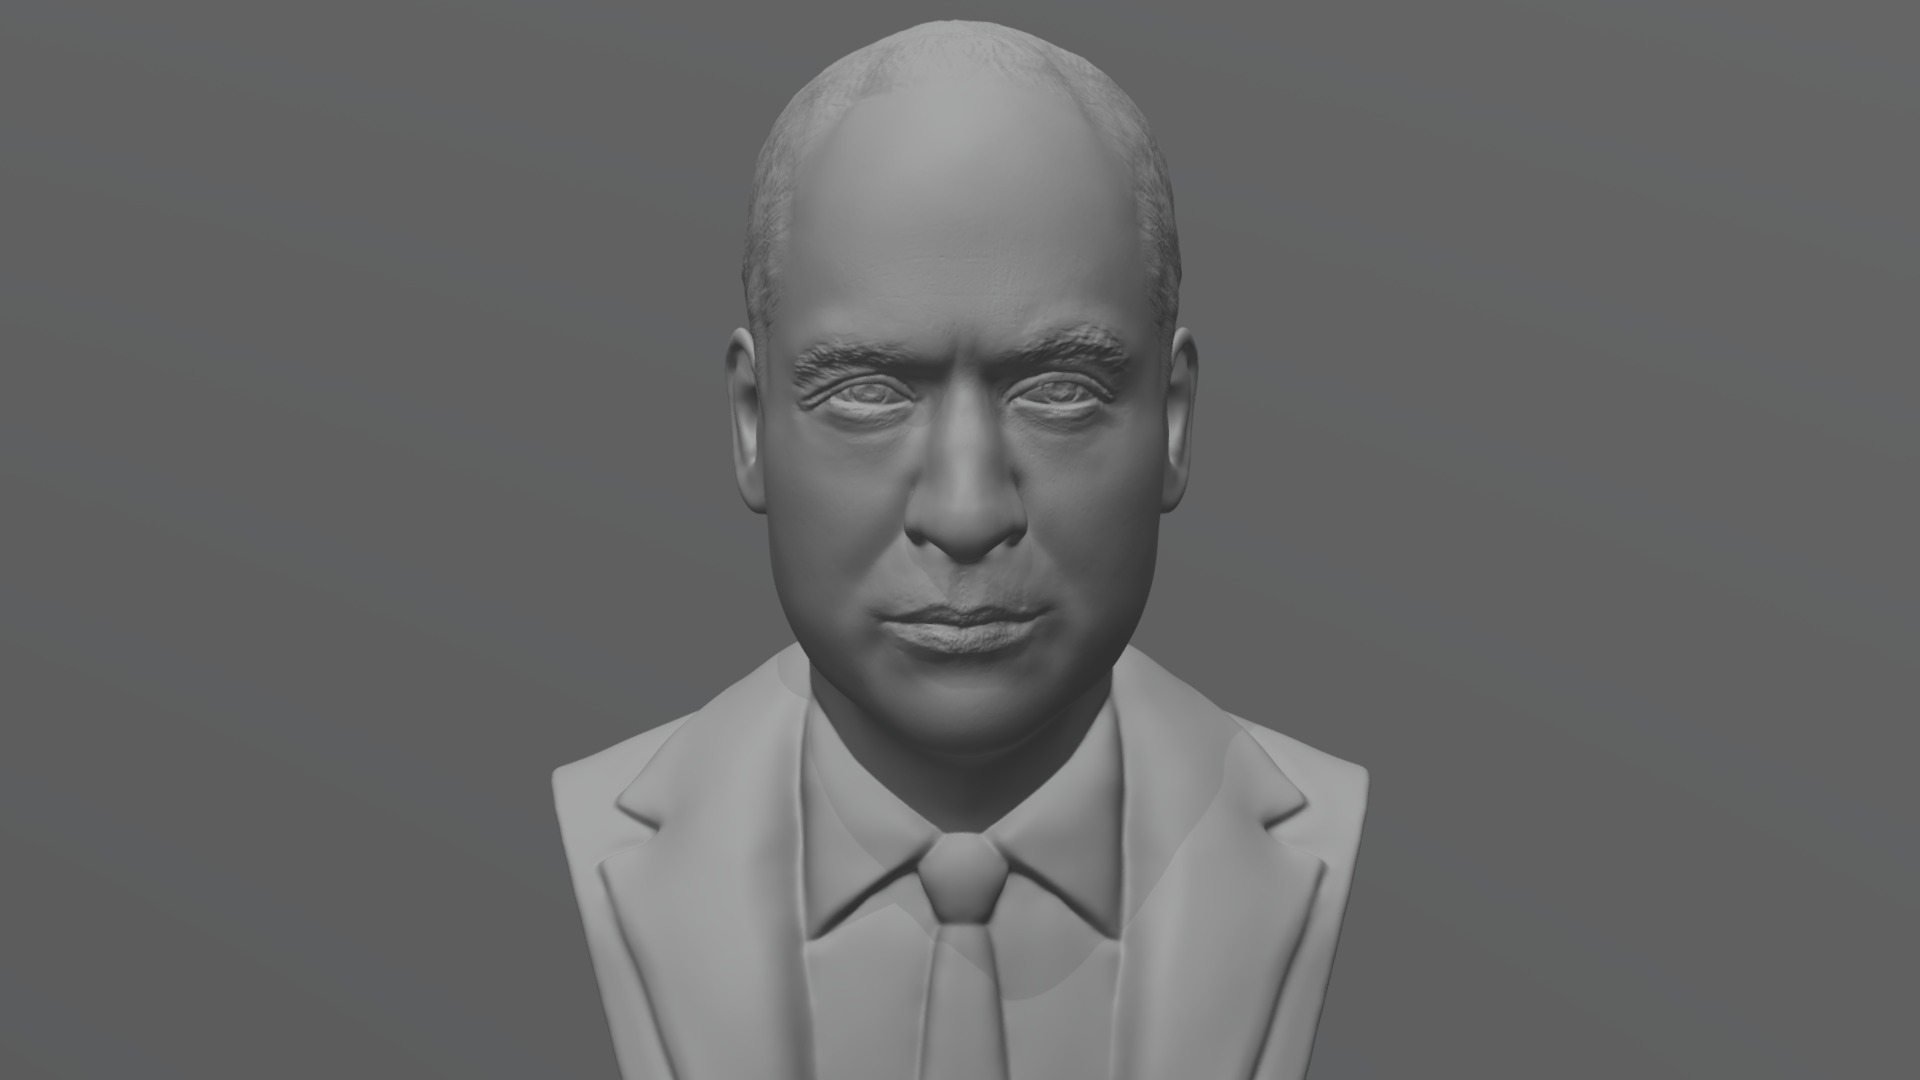 3D model Prince William bust for 3D printing - This is a 3D model of the Prince William bust for 3D printing. The 3D model is about a man in a suit.